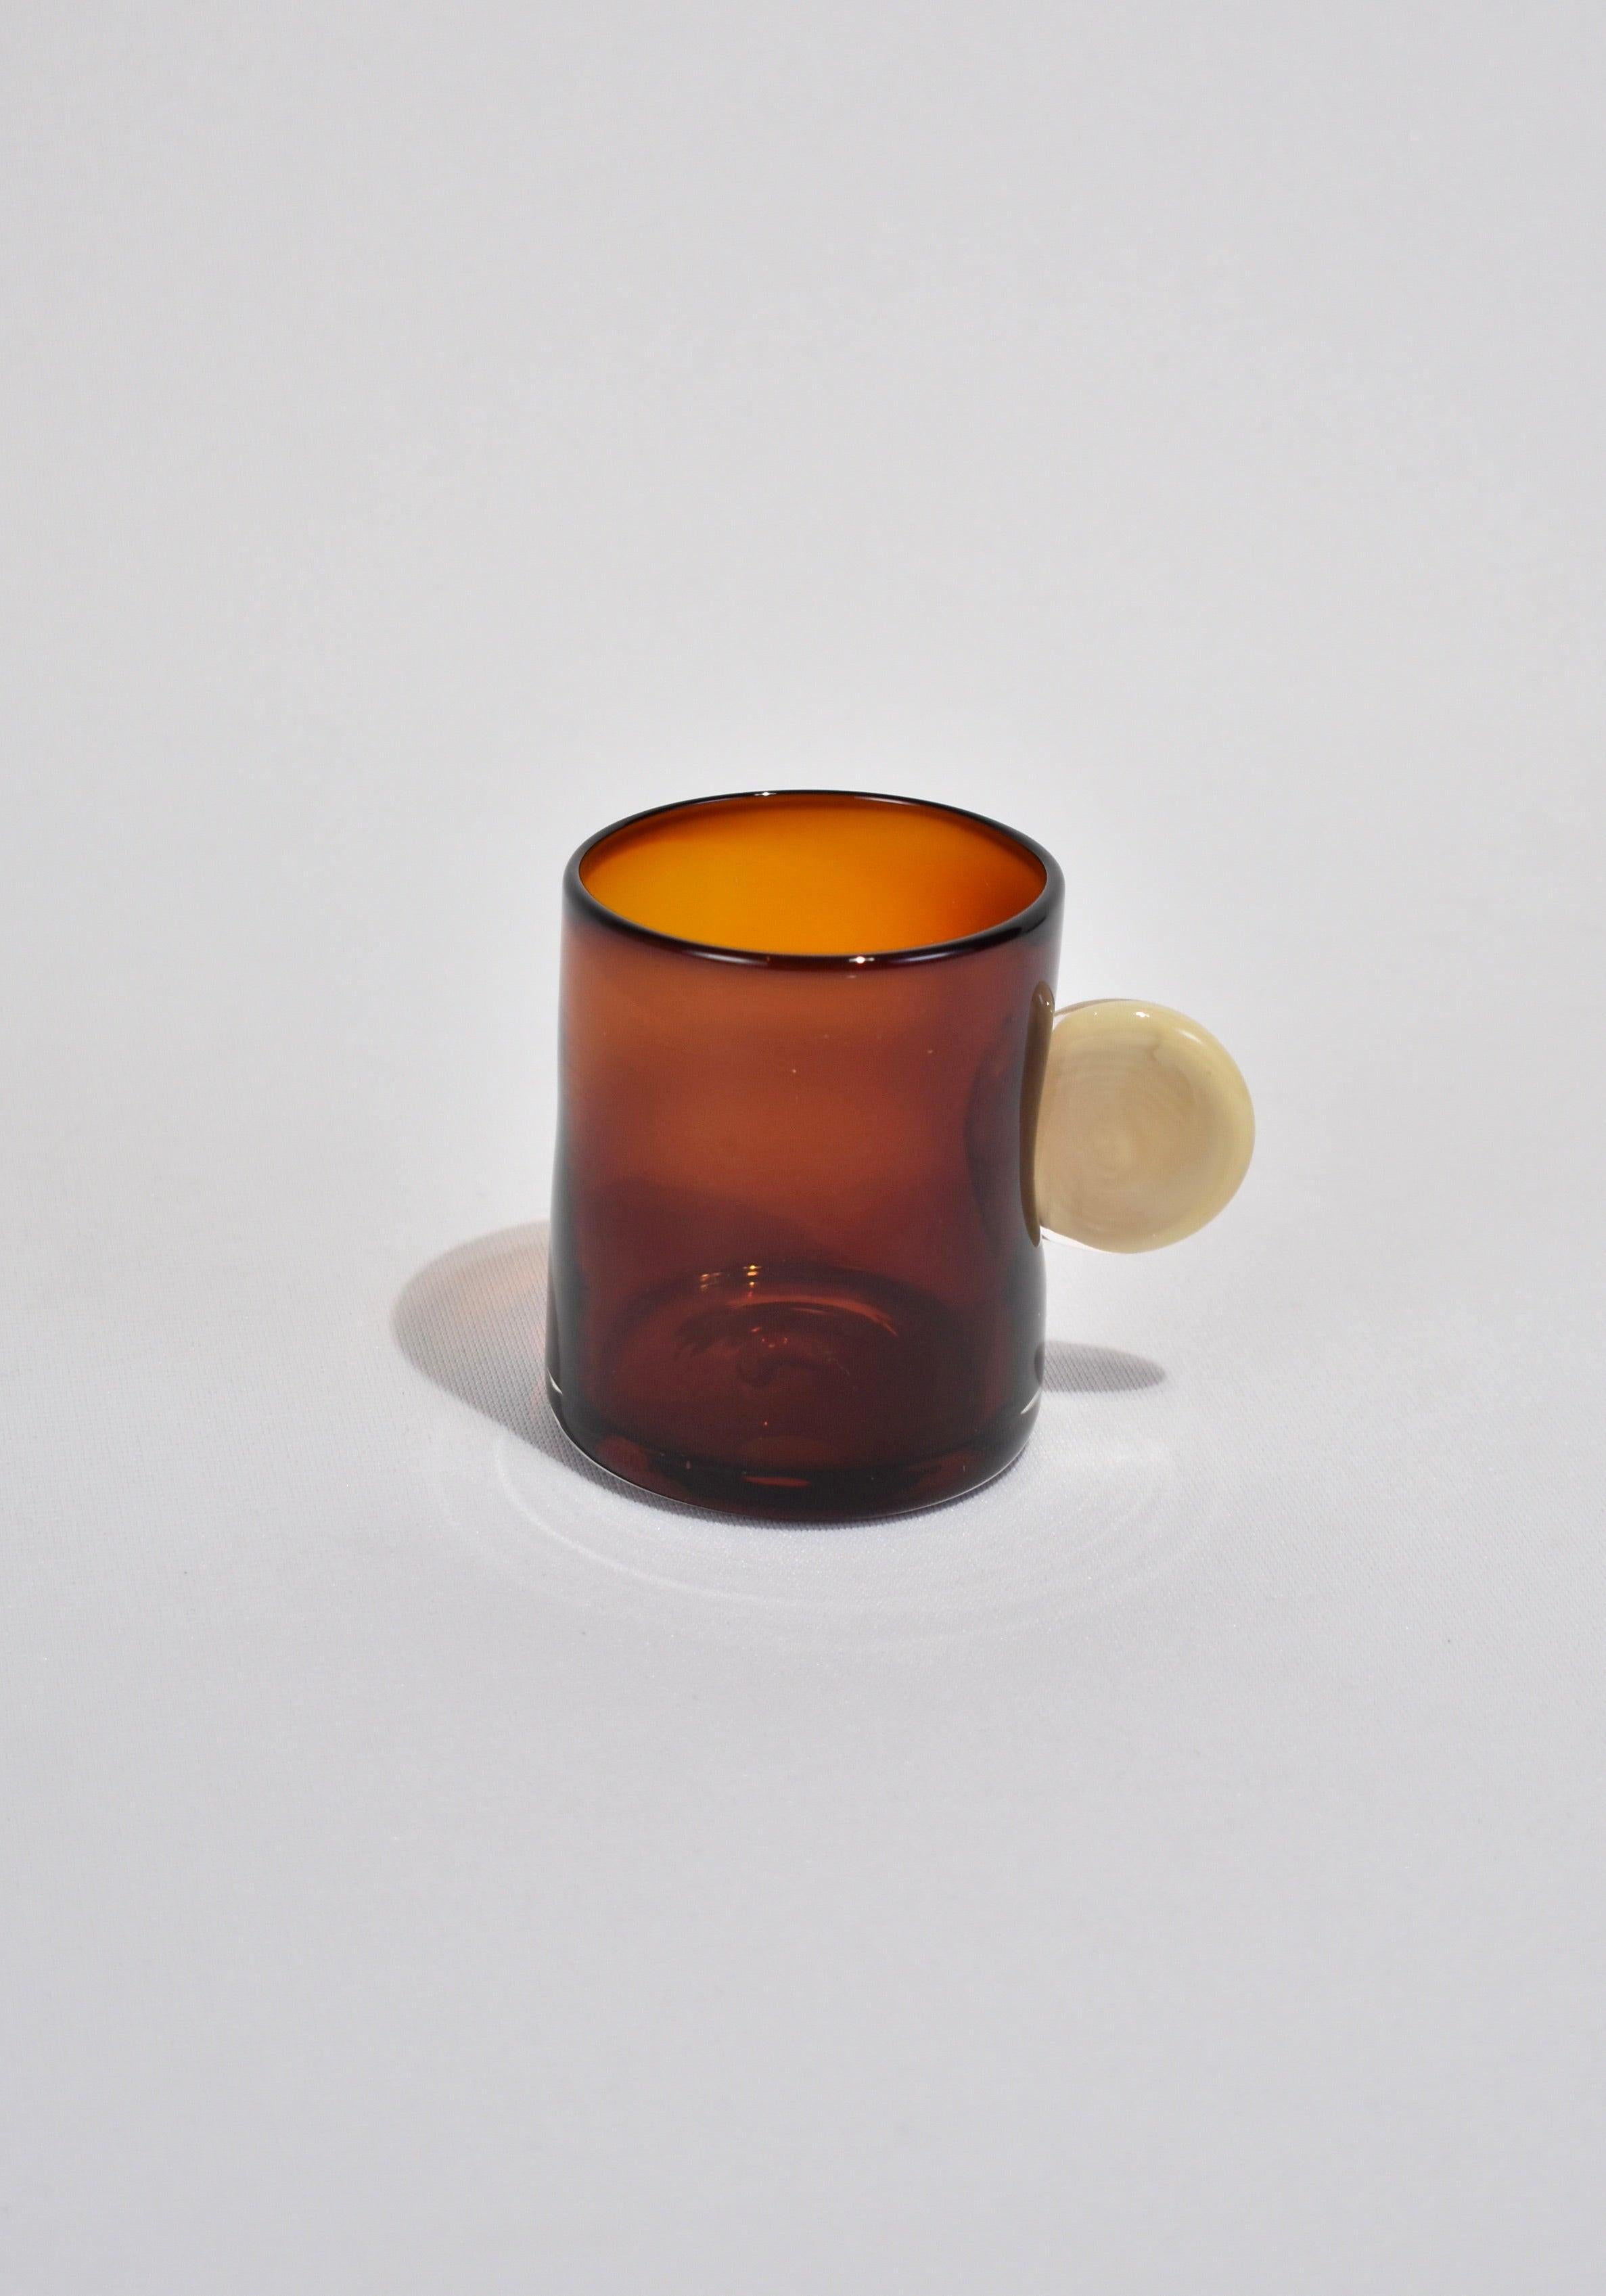 Blown glass tumbler in amber with a cream handle. Perfect size for water, wine, juice, or spirits. Handmade in USA by Grace Whiteside of Sticky Glass.

Please note: Due to the handmade nature of this cup, subtle variations in form and finish are